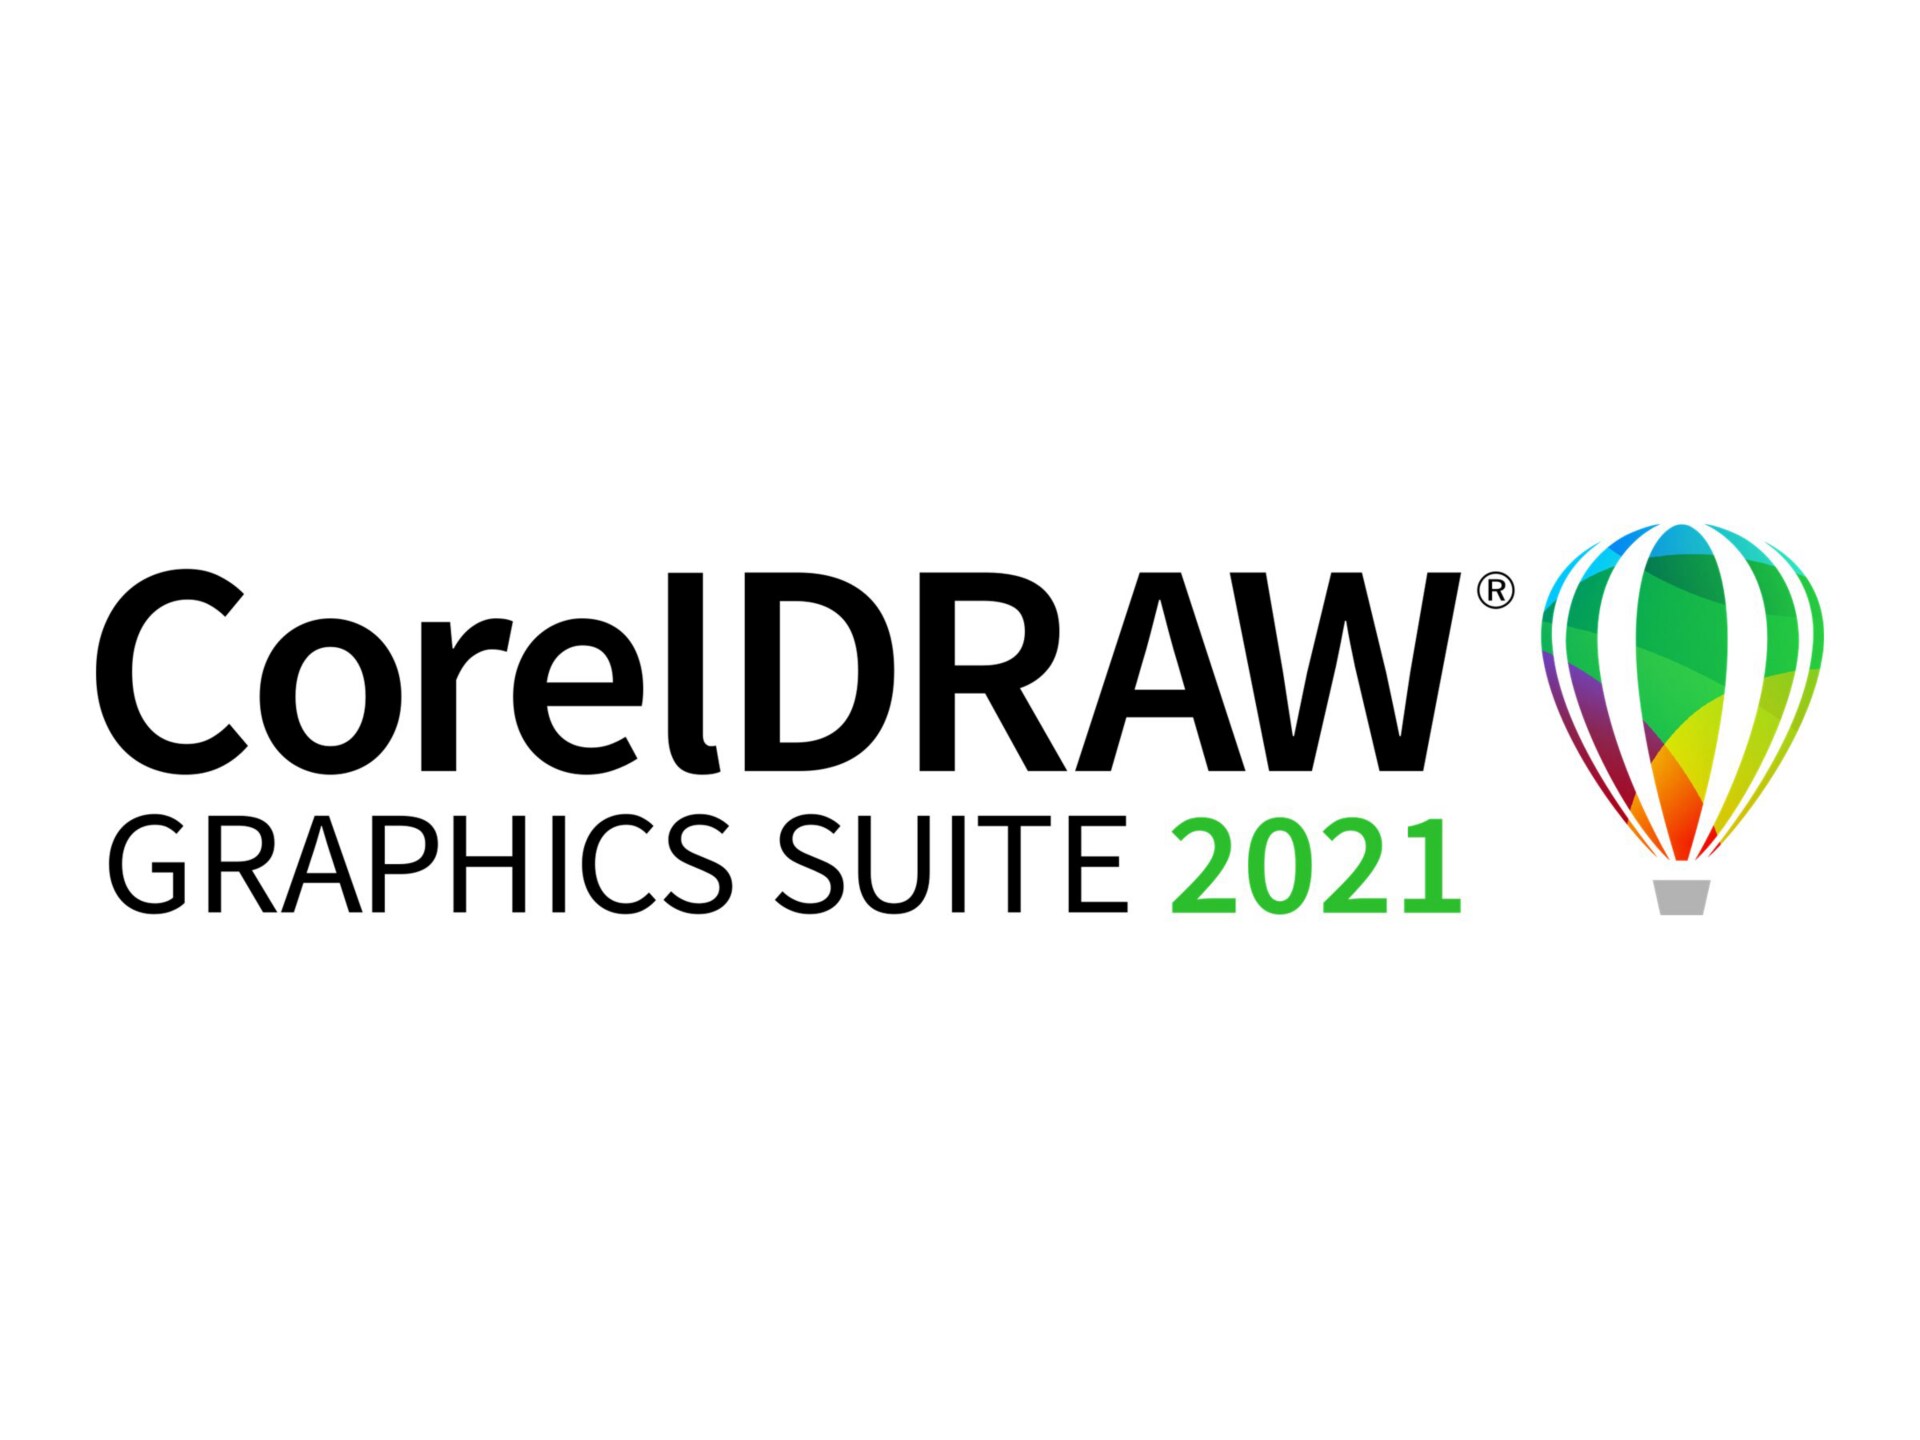 CorelDRAW Graphics Suite 2021 - subscription license (1 year) - 1 user